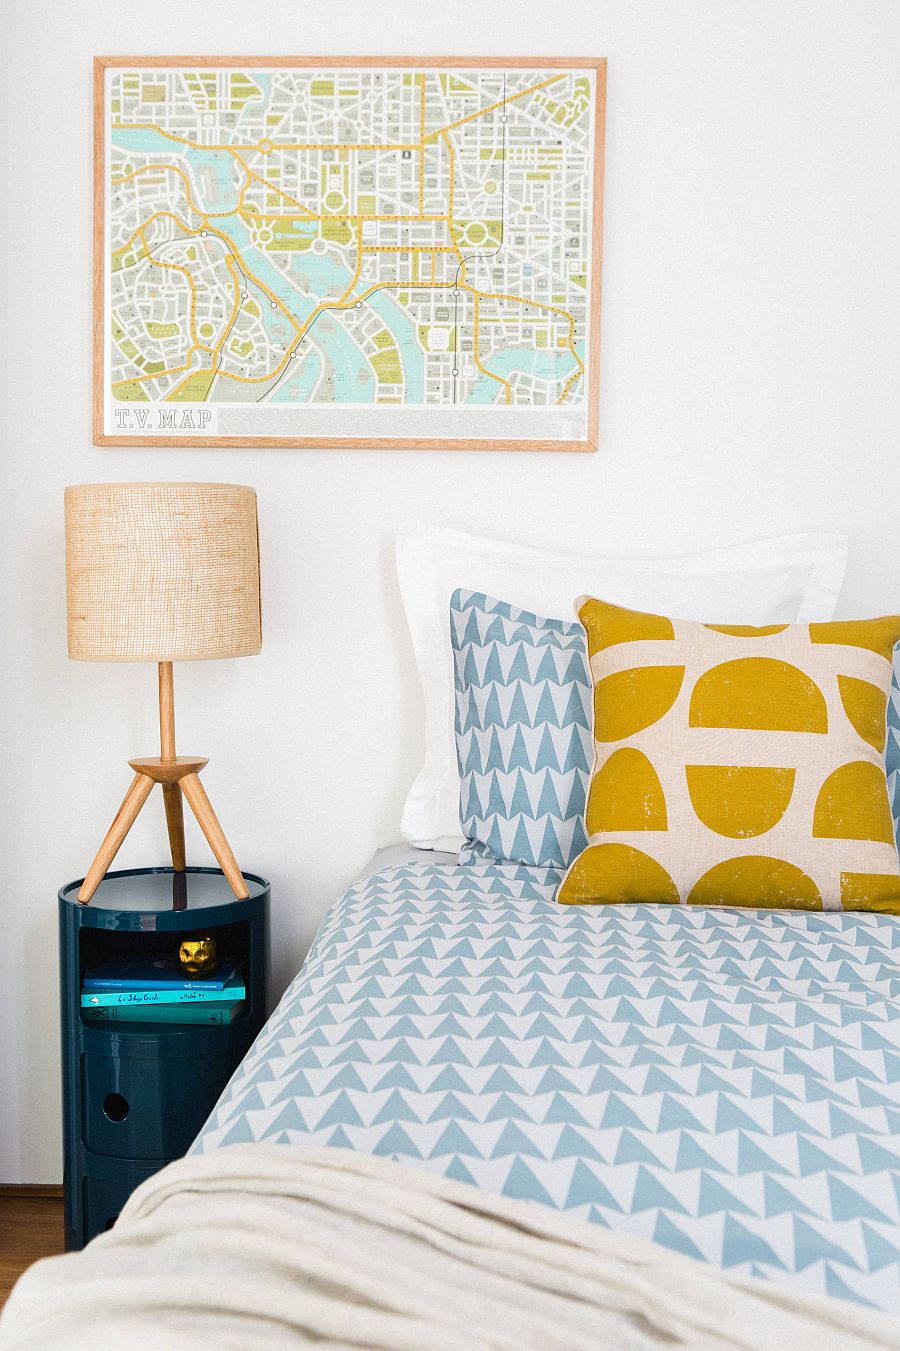 Framed maps are an easy way to add both color and pattern to the bedroom